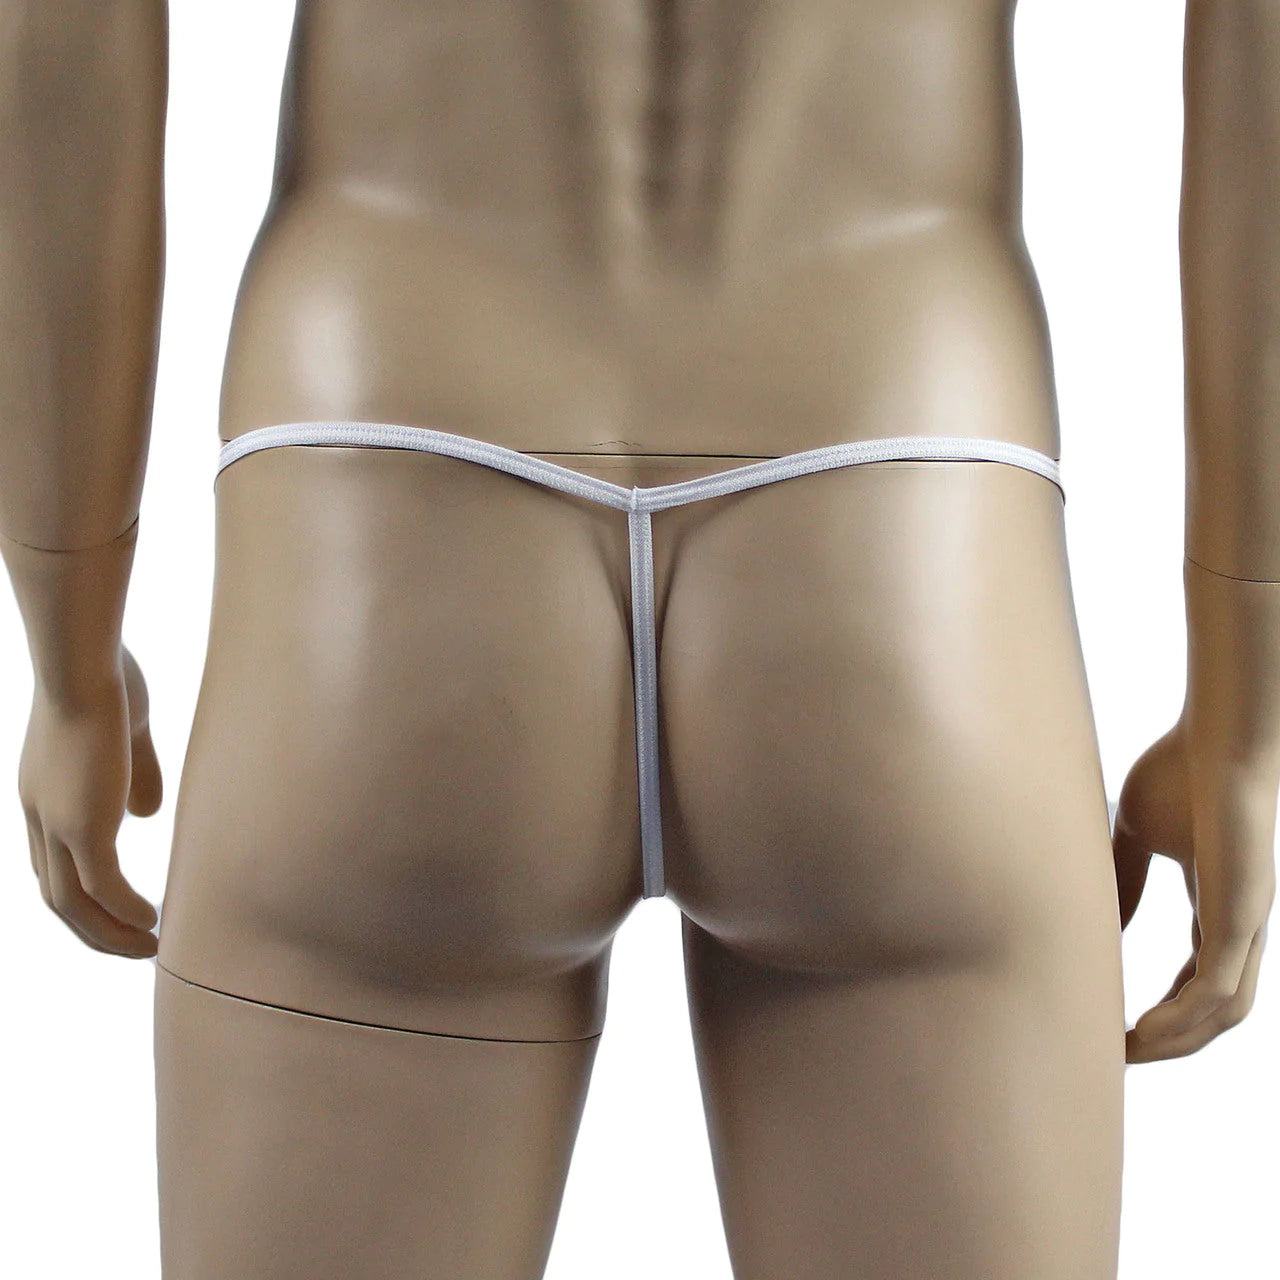 SALE - Mens Xmas Stretch Spandex Pouch G string with Merry Christmas Bow White